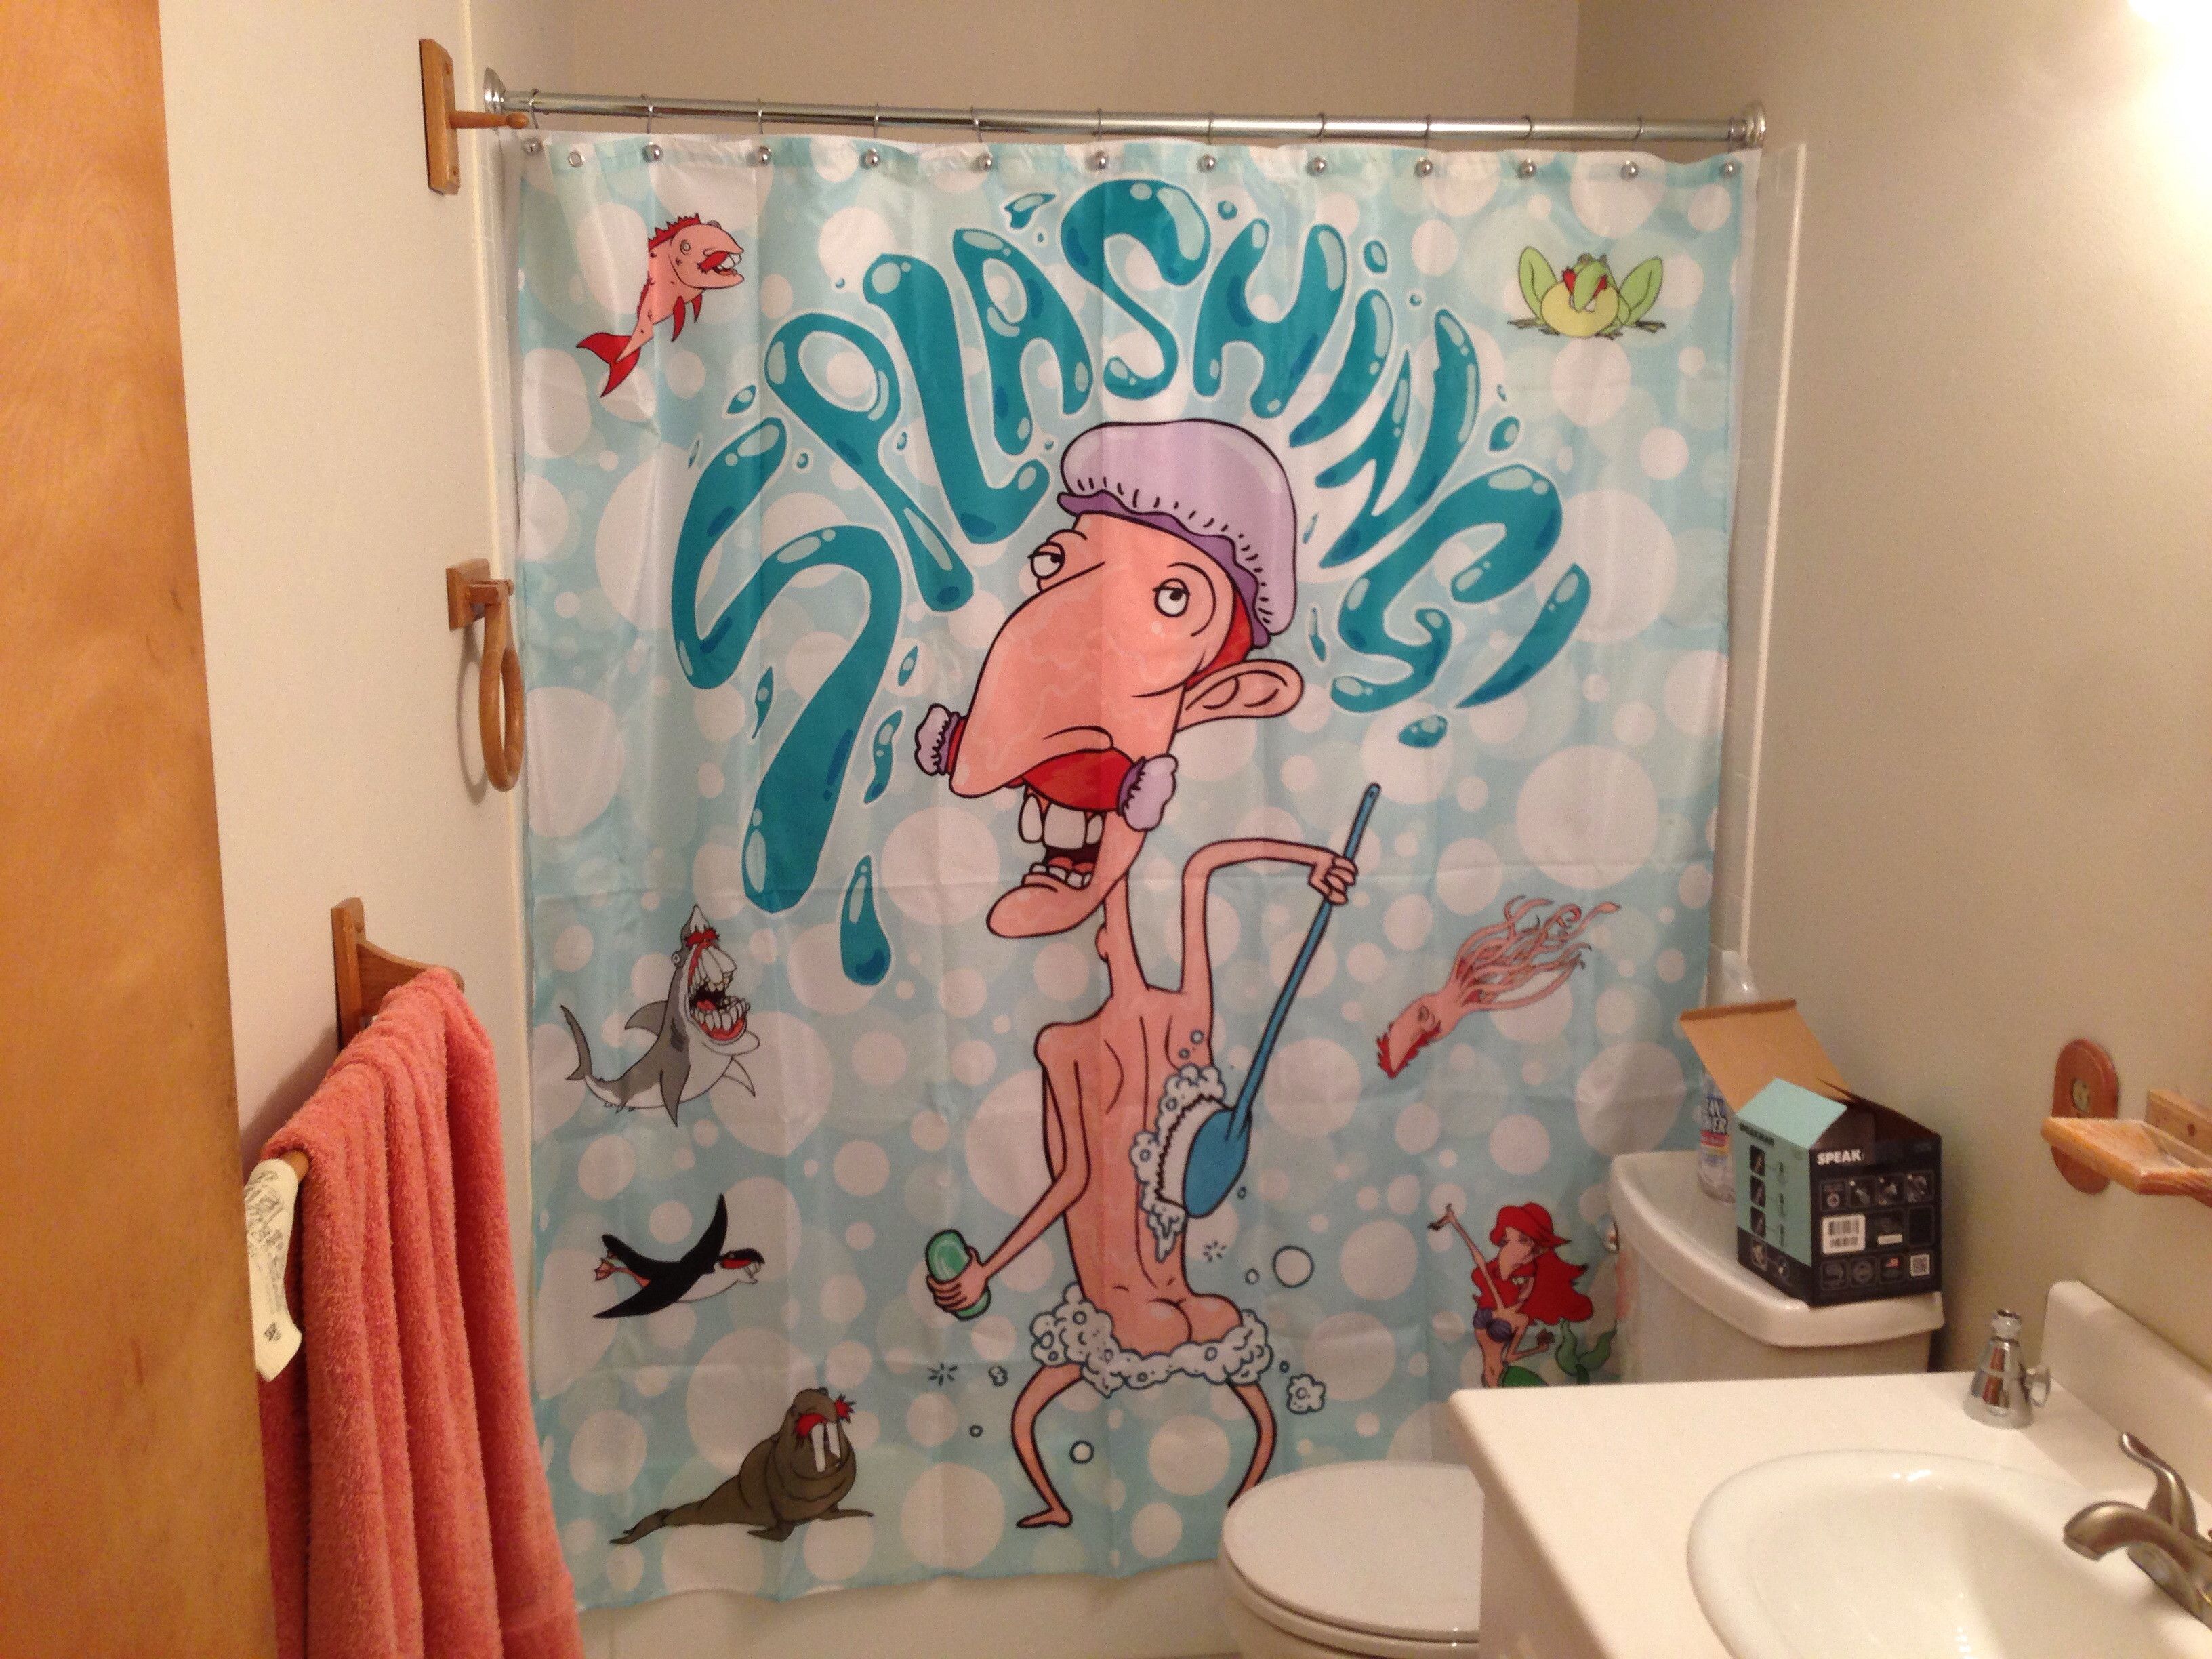 Another awesome shower curtain. 